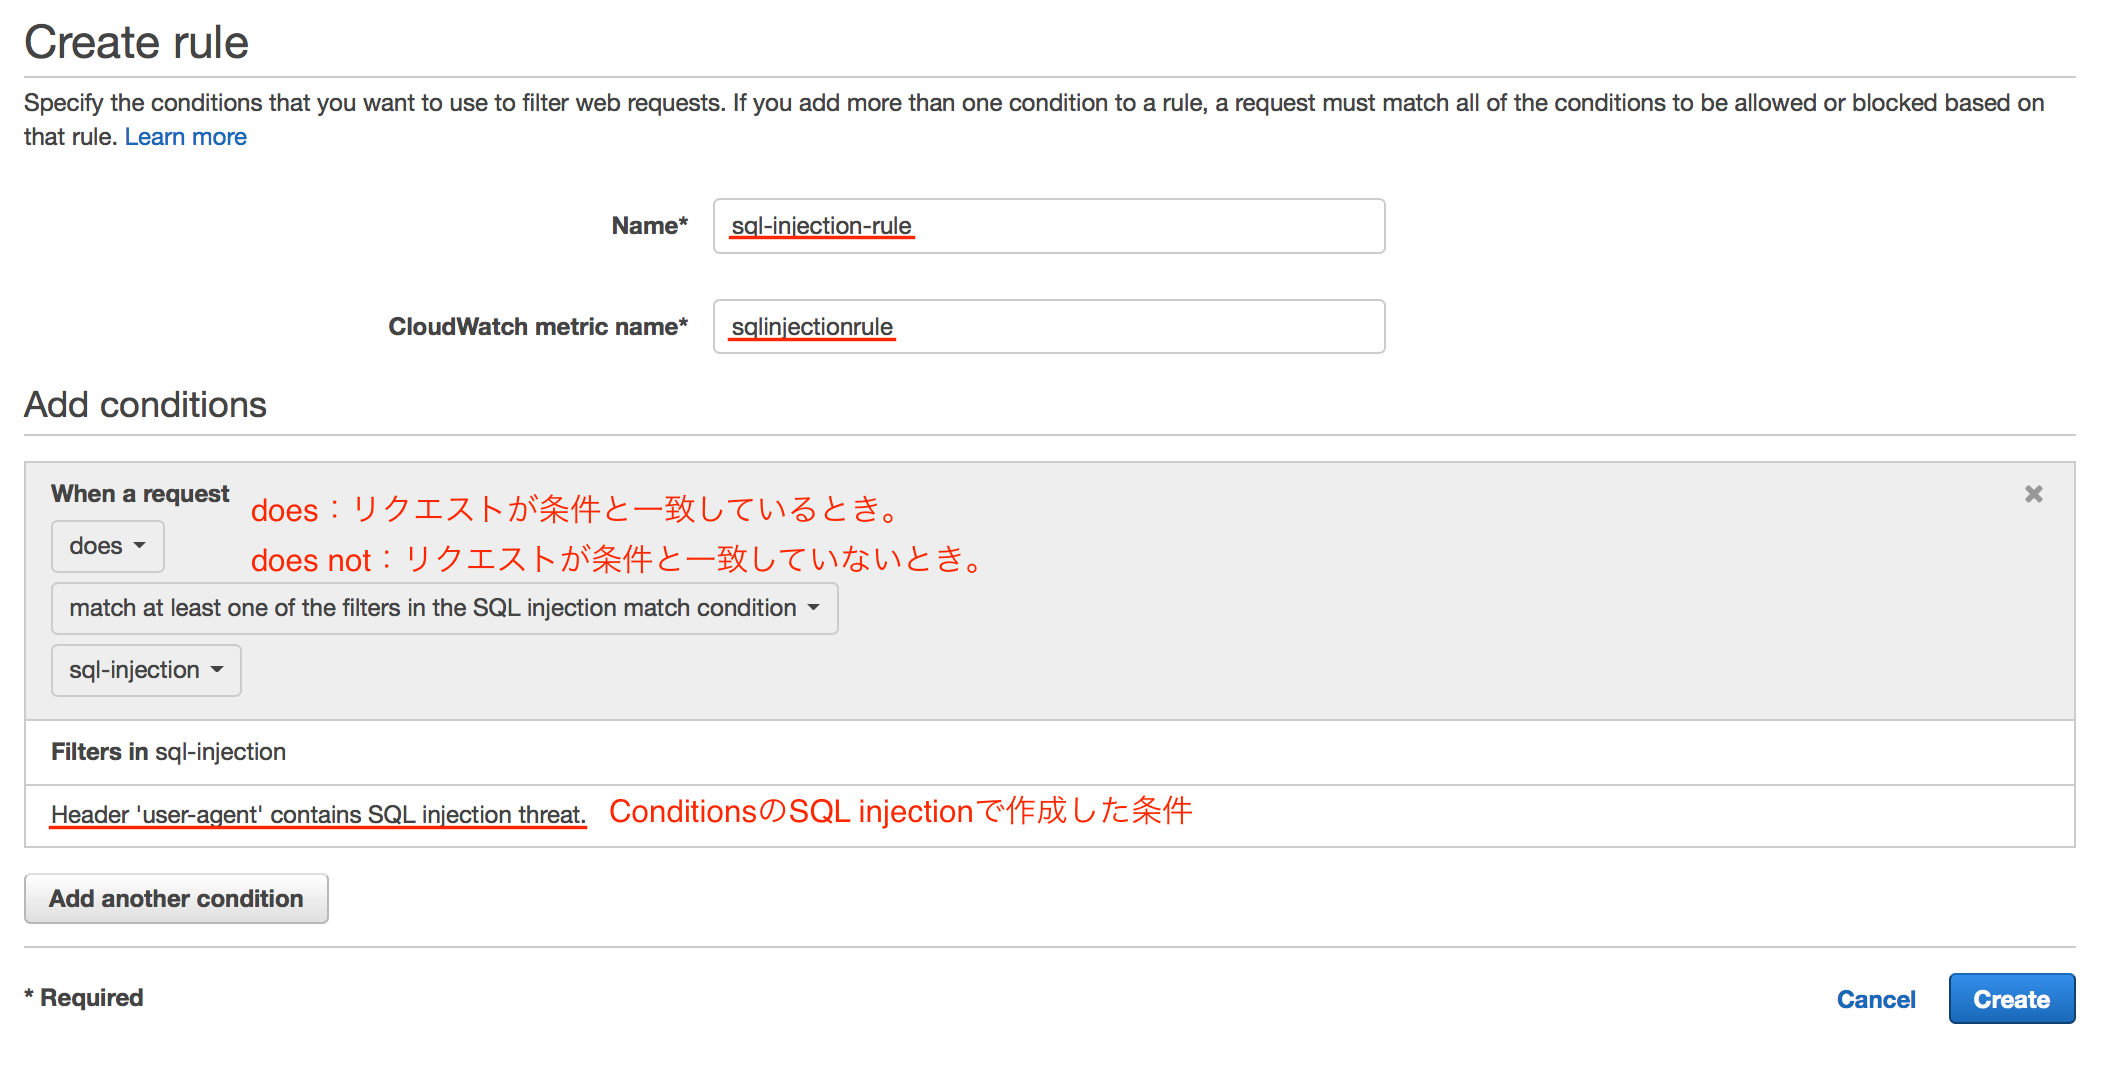 aws-waf_sql-injection_2015120407.png